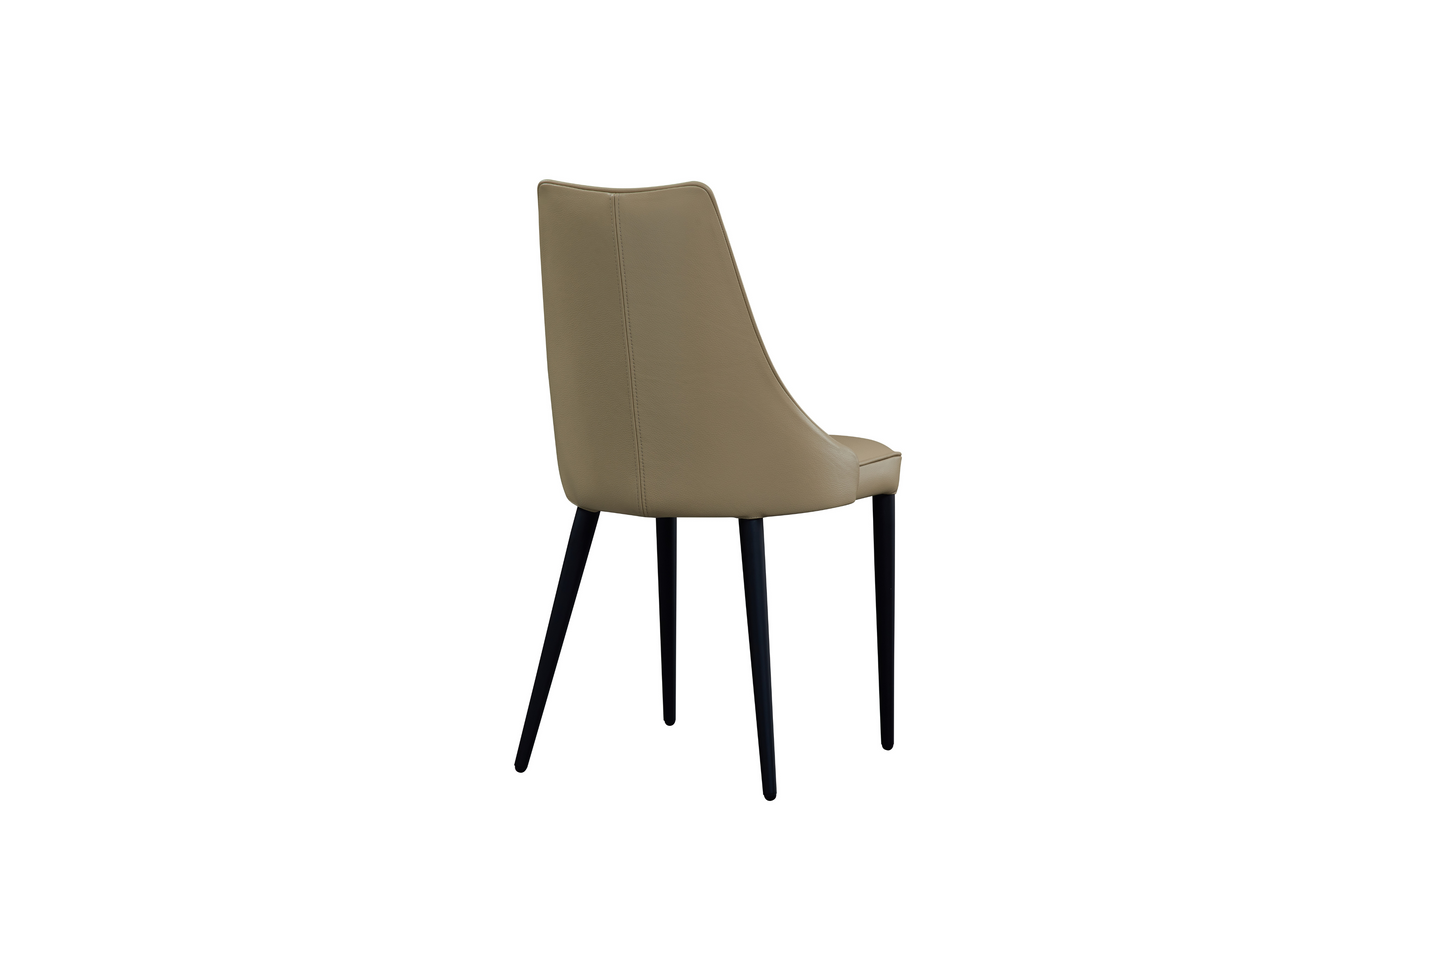 Milano Leather Dining Chair SKU: 18991-C